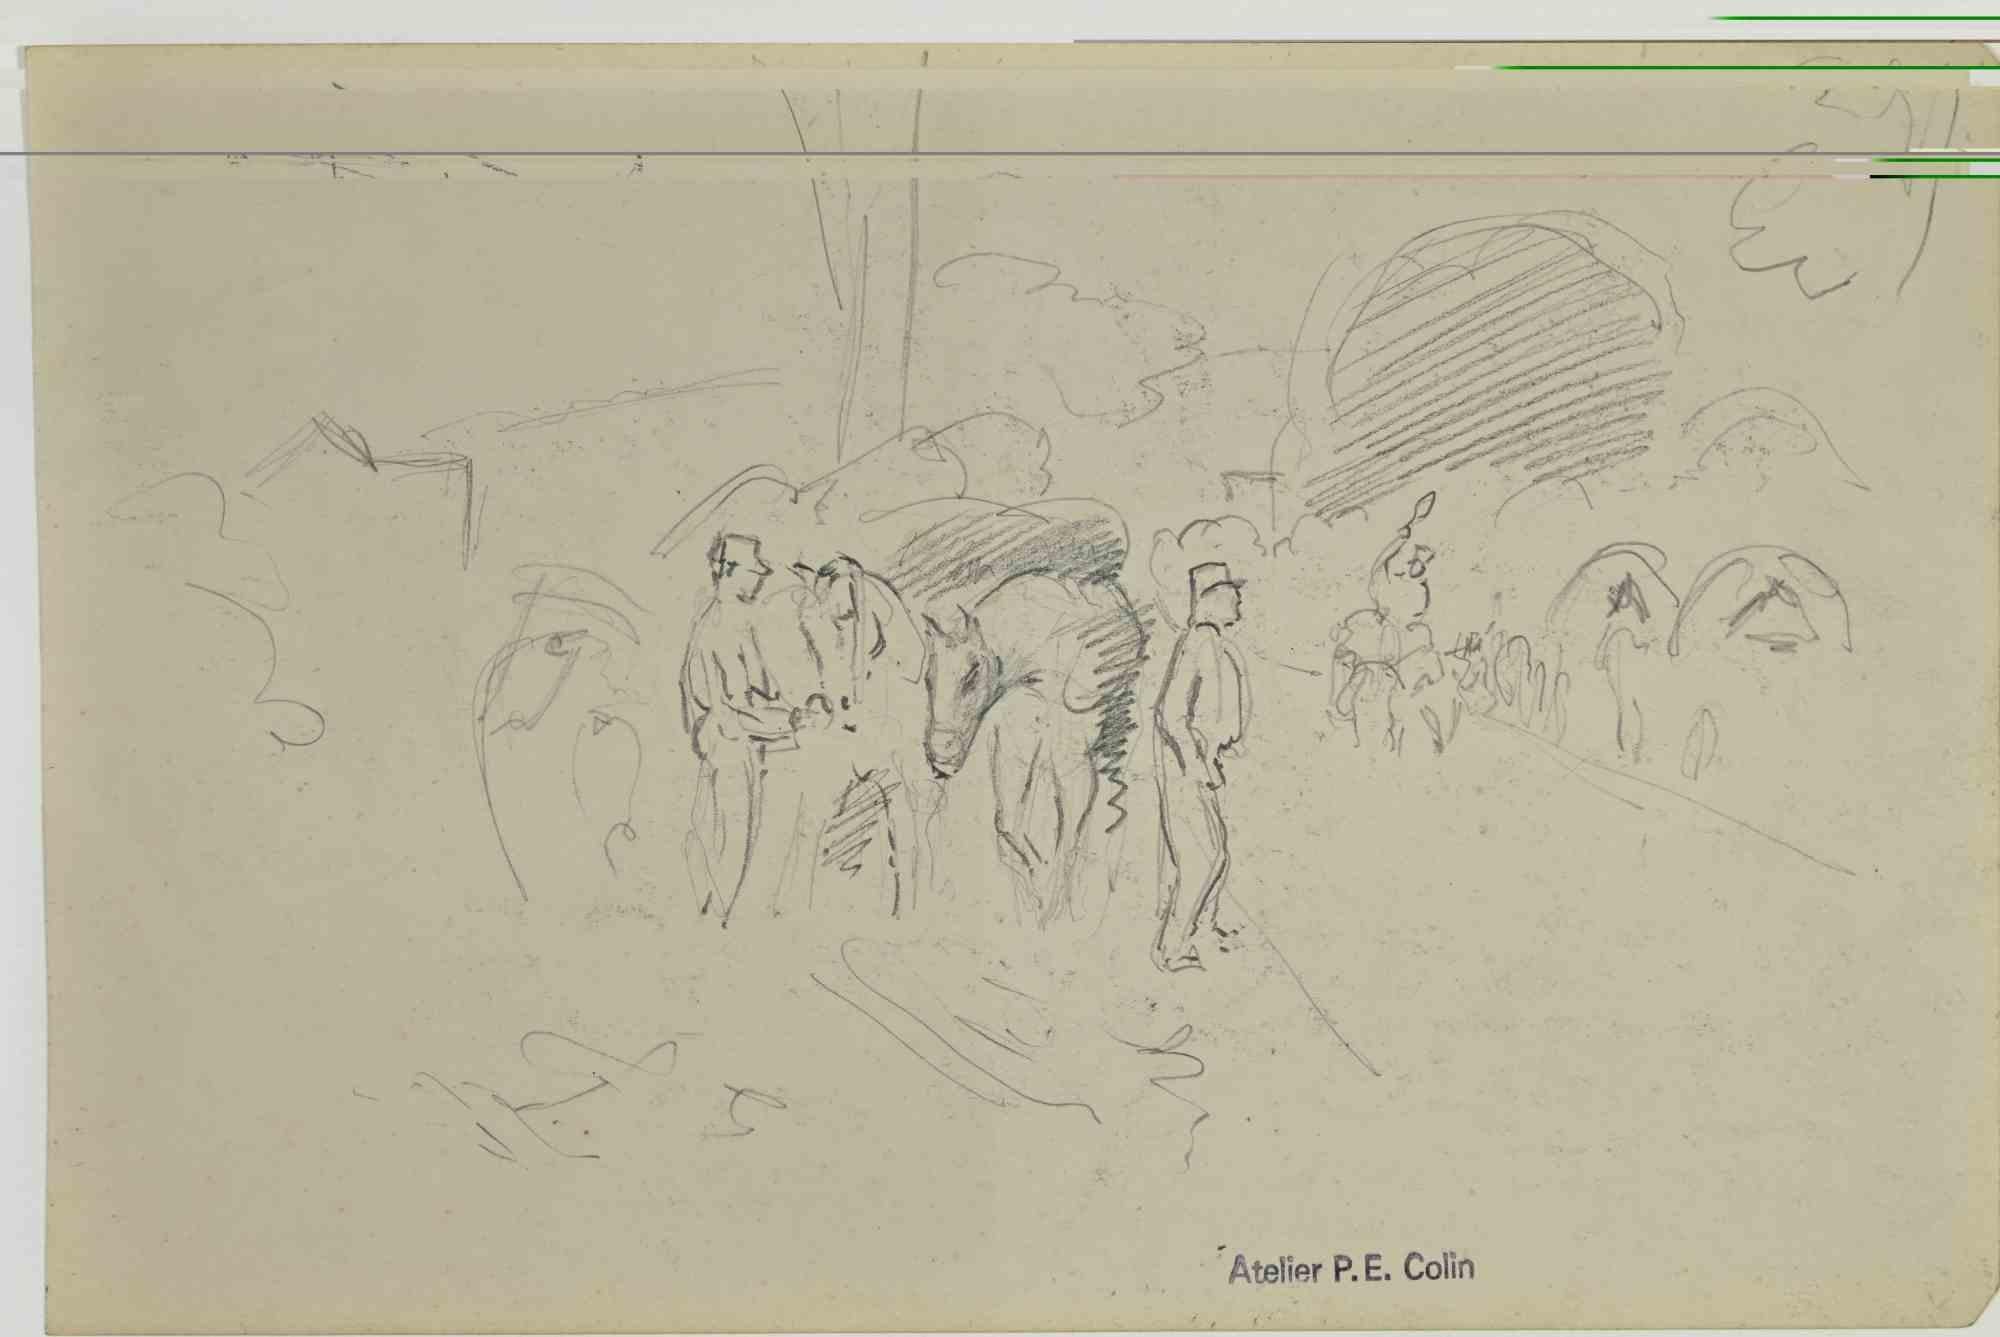 Soldiers in the Camp is a drawing realized by Paul Emile Colin in the Early 20th Century.

Carbon Pencil on ivory-colored paper

Stamped on the lower.

Good conditions with slight foxing.

The artwork is realized through deft expressive strokes.